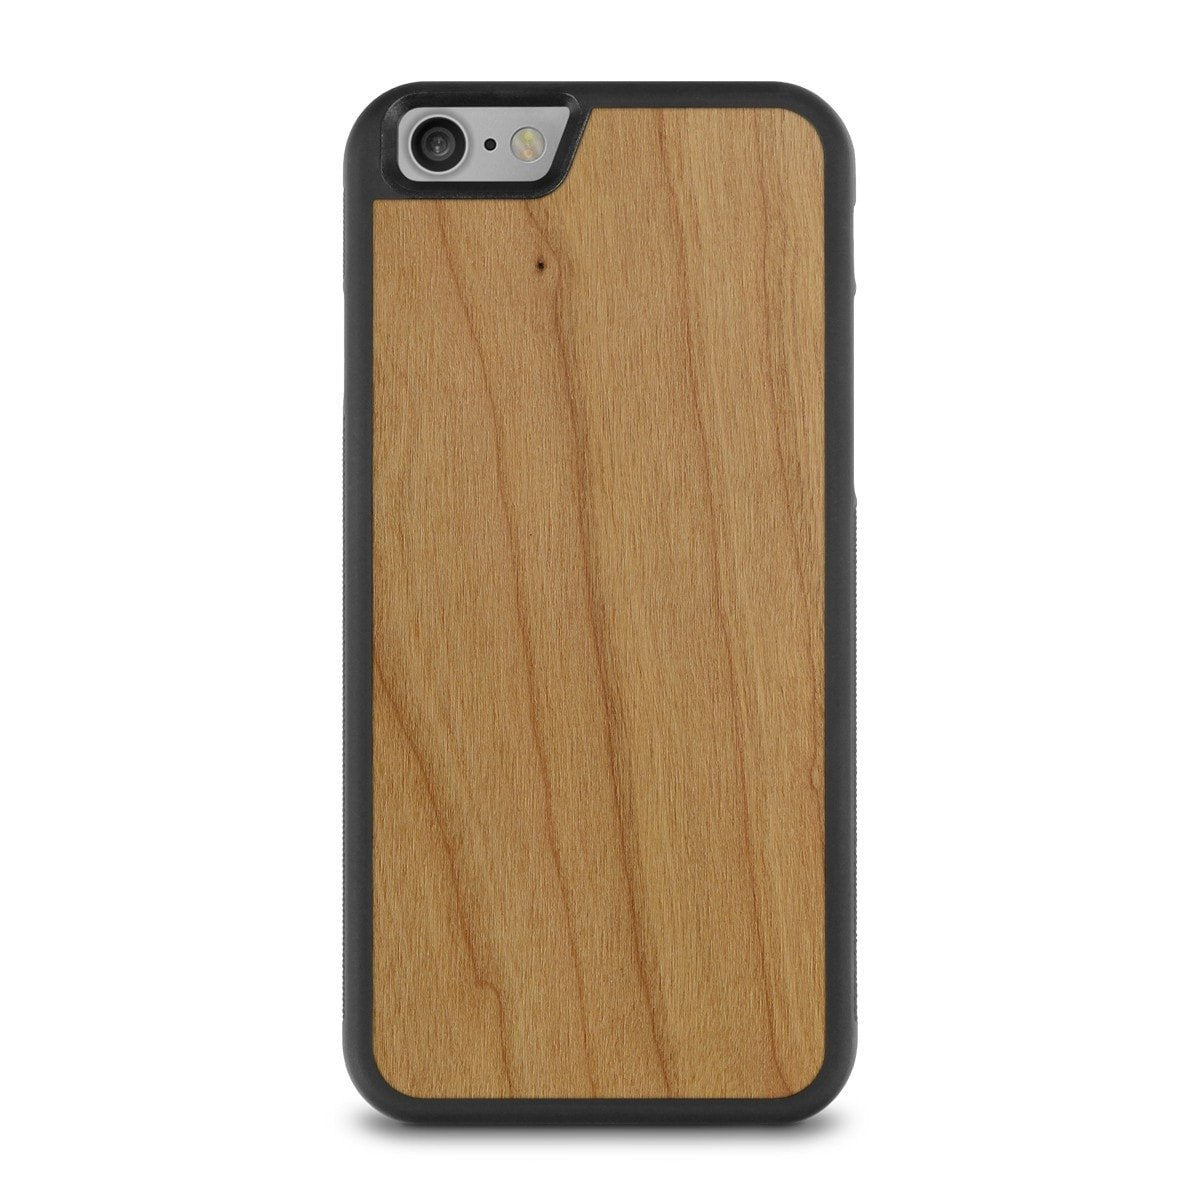  iPhone 7 —  #WoodBack Explorer Case - Cover-Up - 2